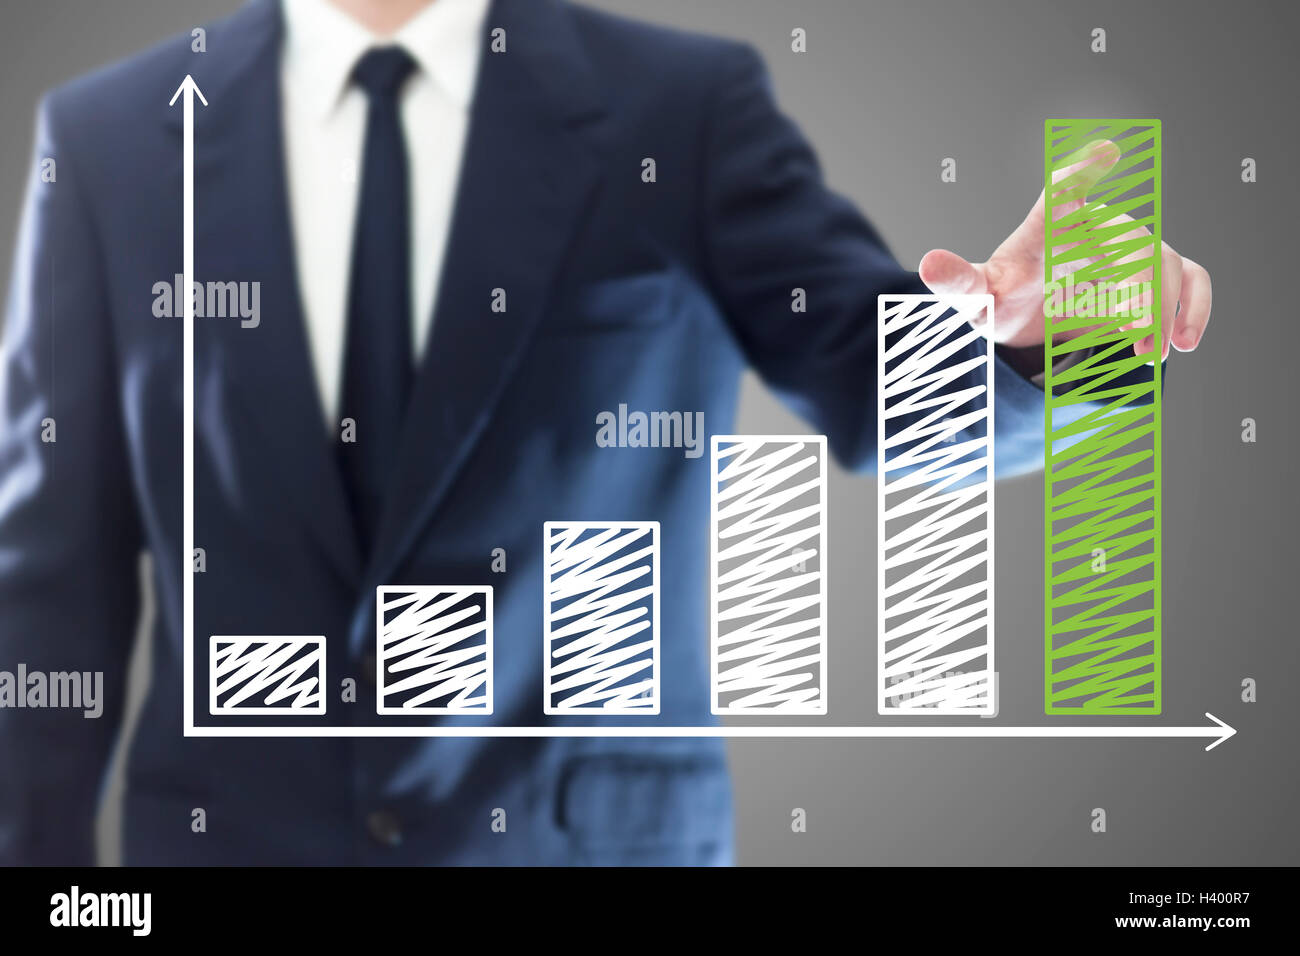 Businessman presenting a successful sustainable development on a bar chart Stock Photo